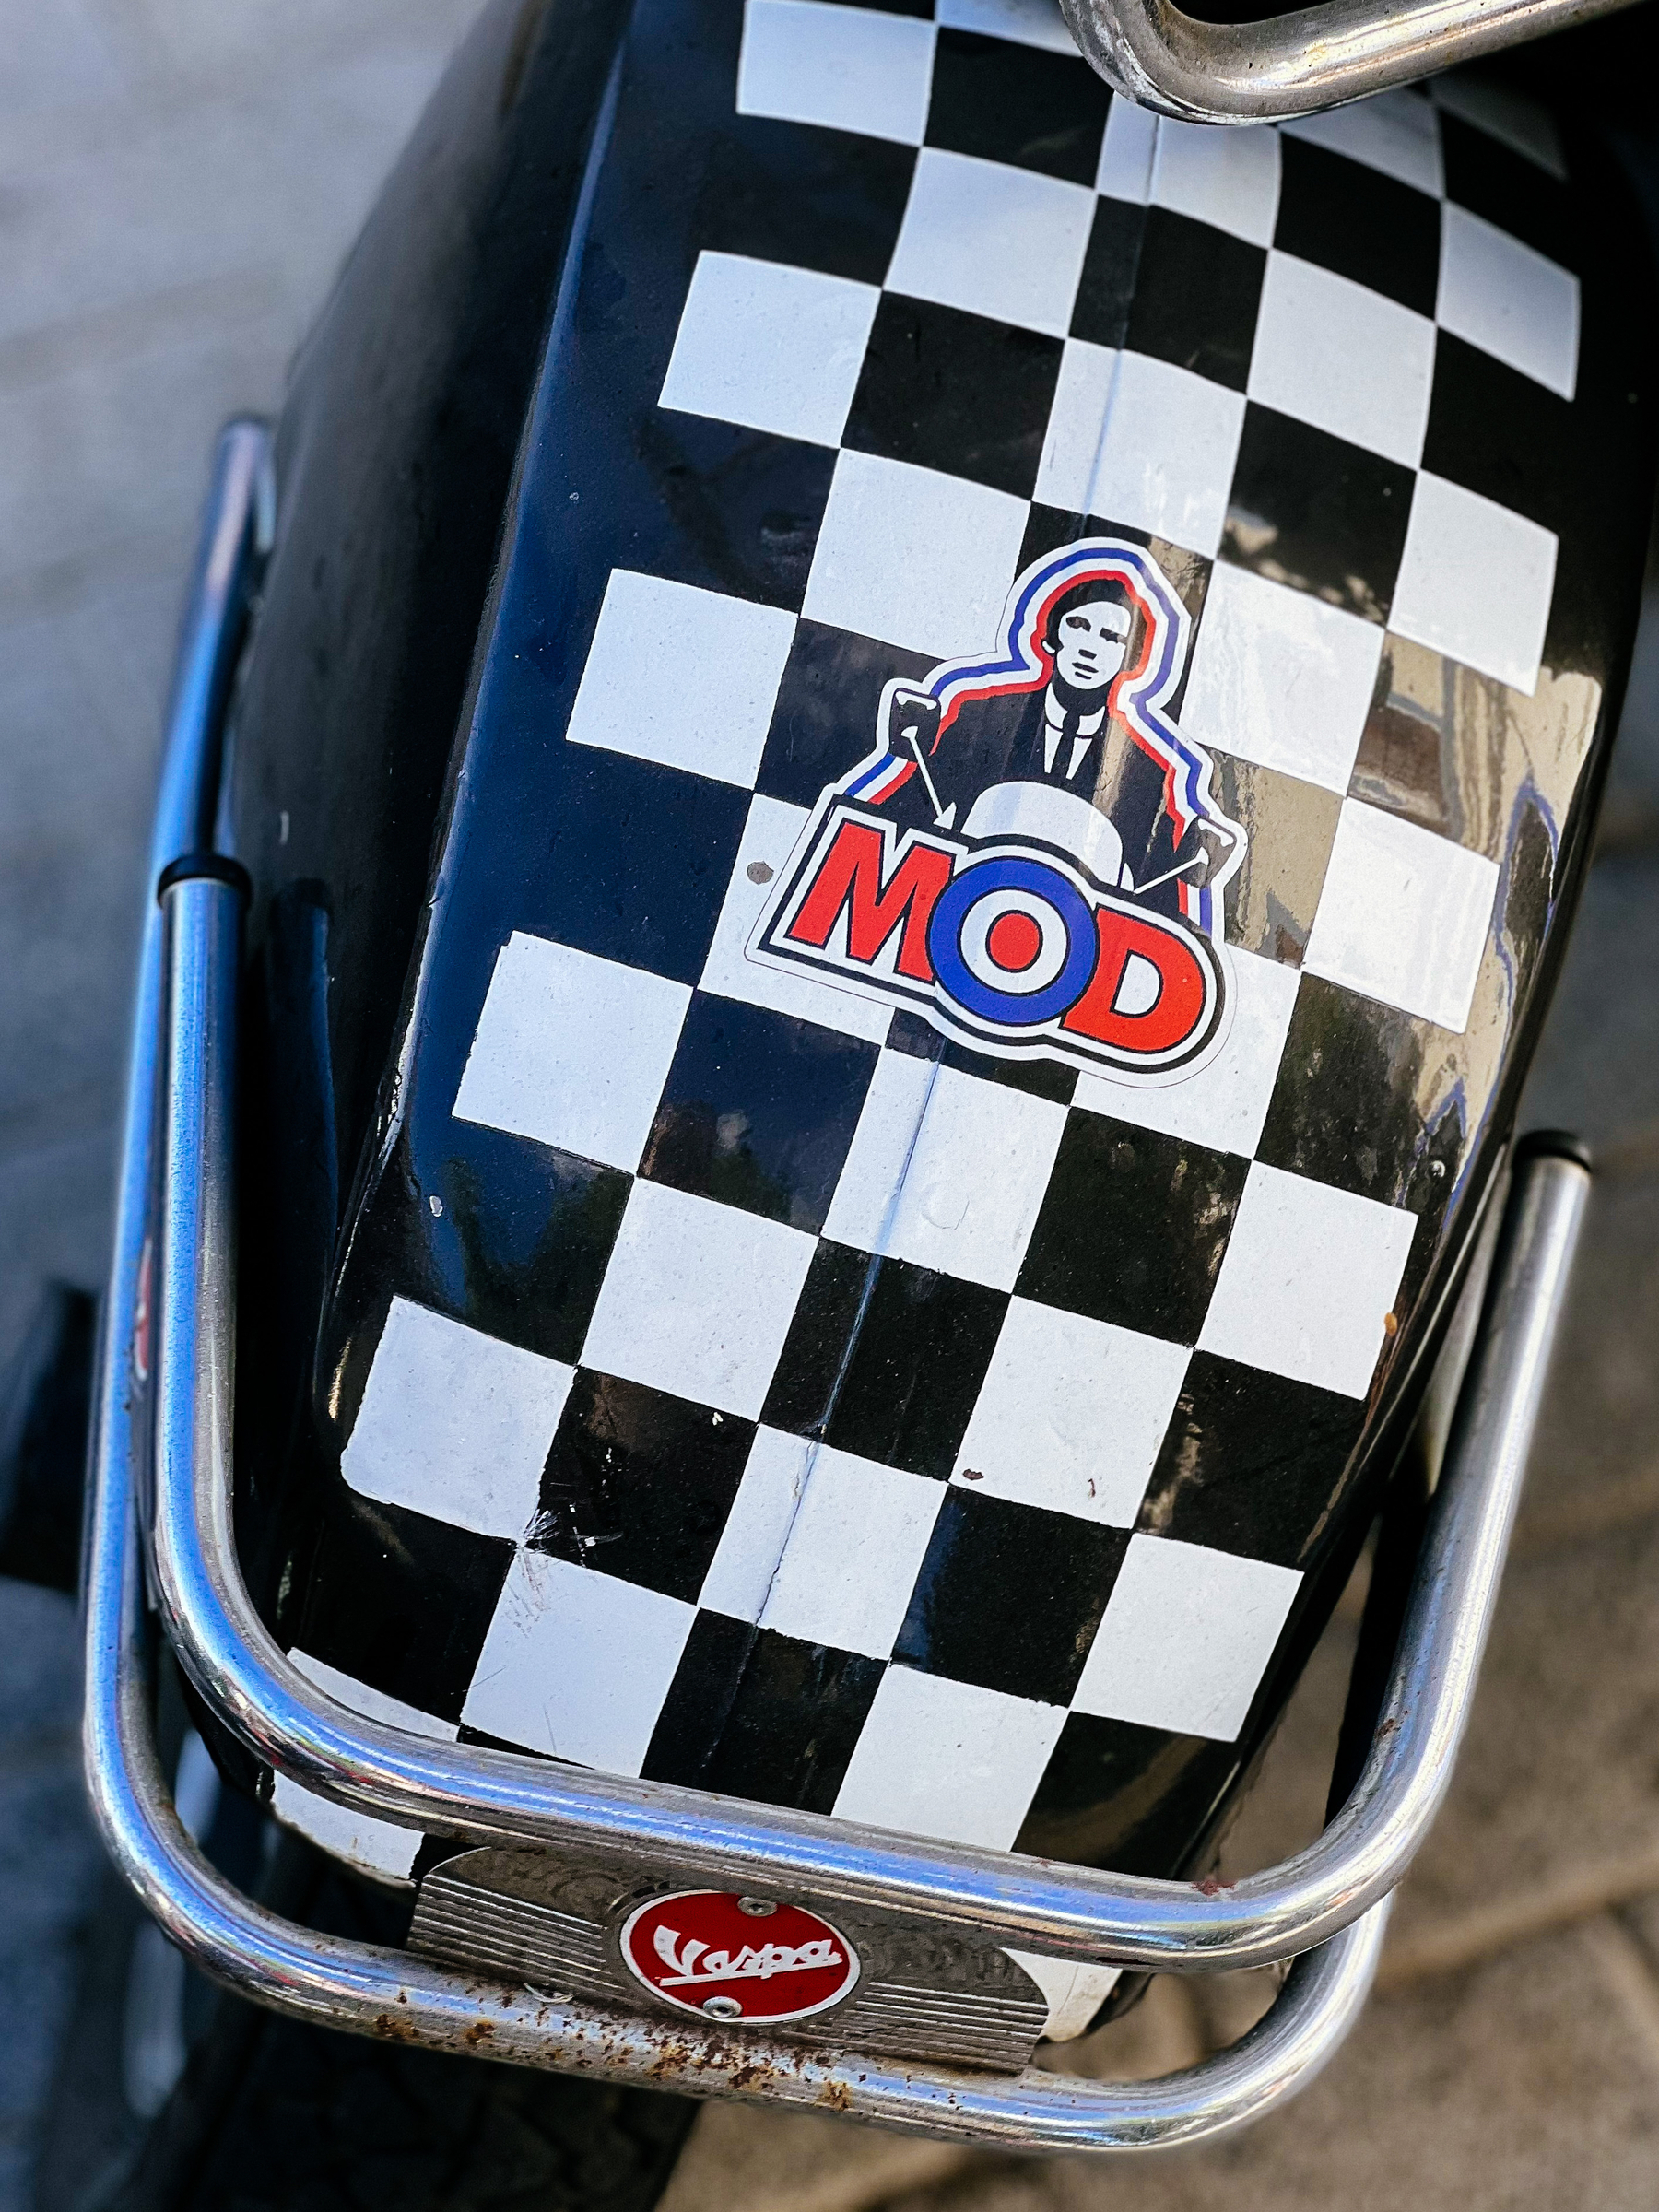 front wheel of a motorcycle, the word “mod” on top of a chess pattern